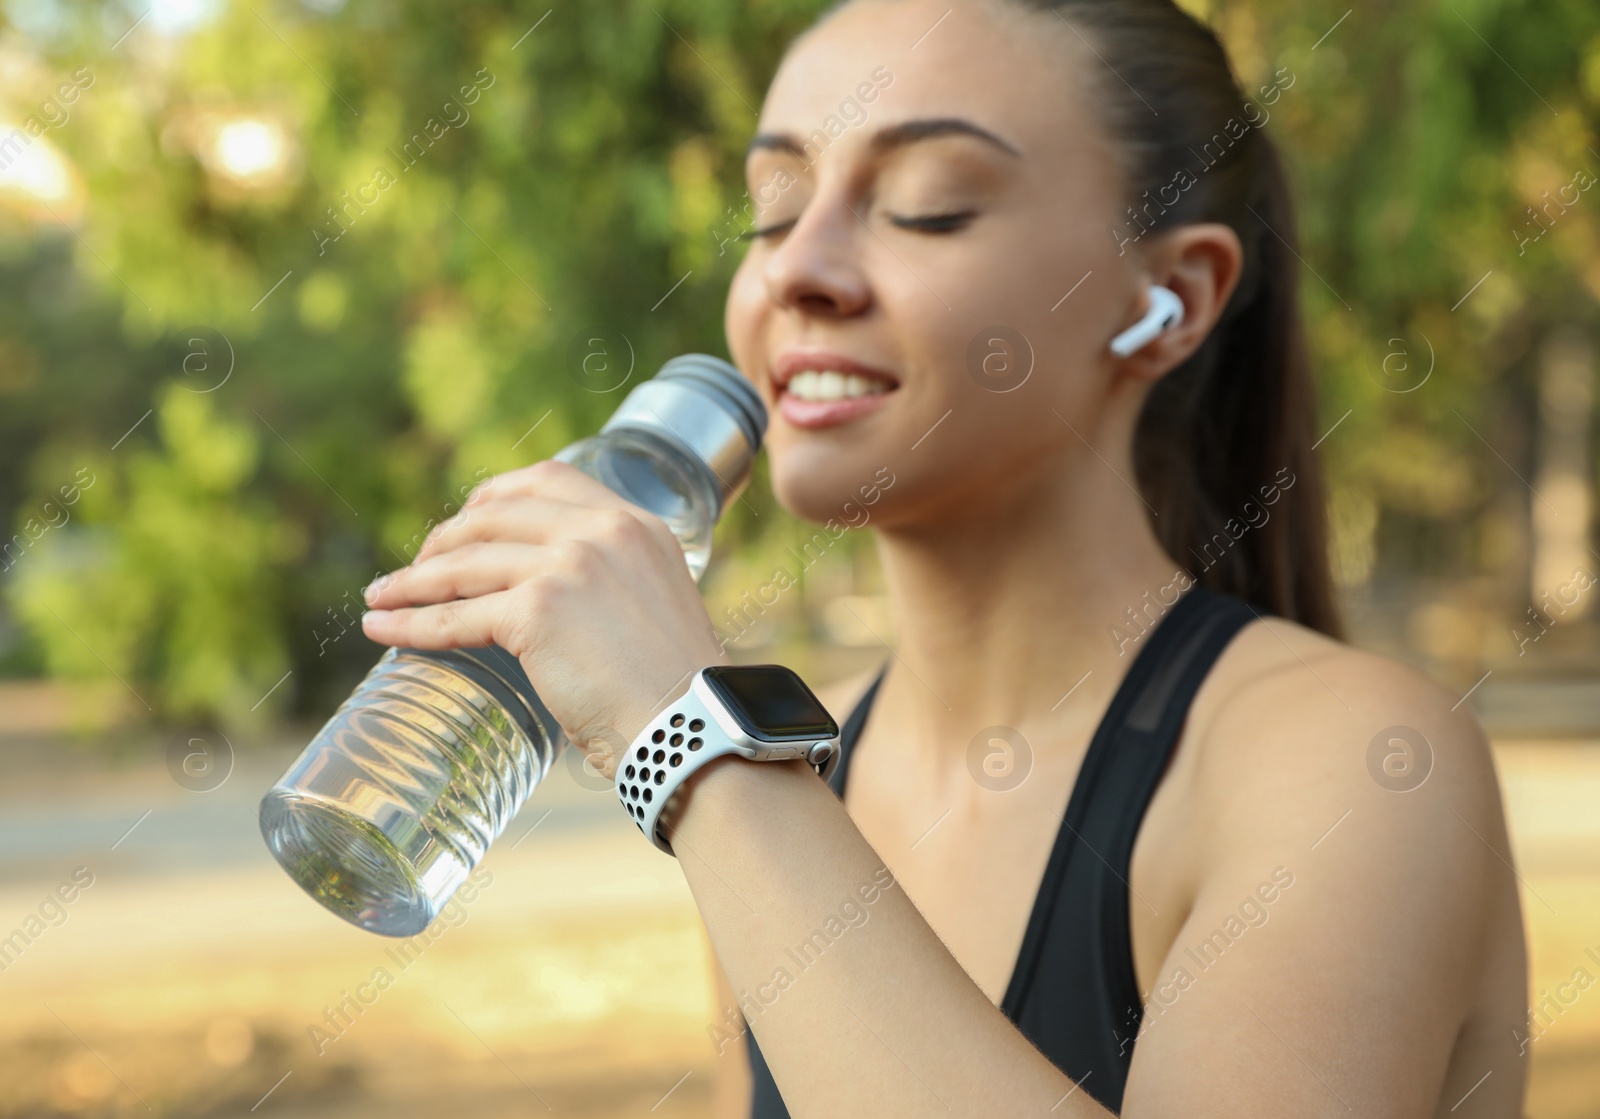 Photo of Woman with modern smart watch drinking water outdoors